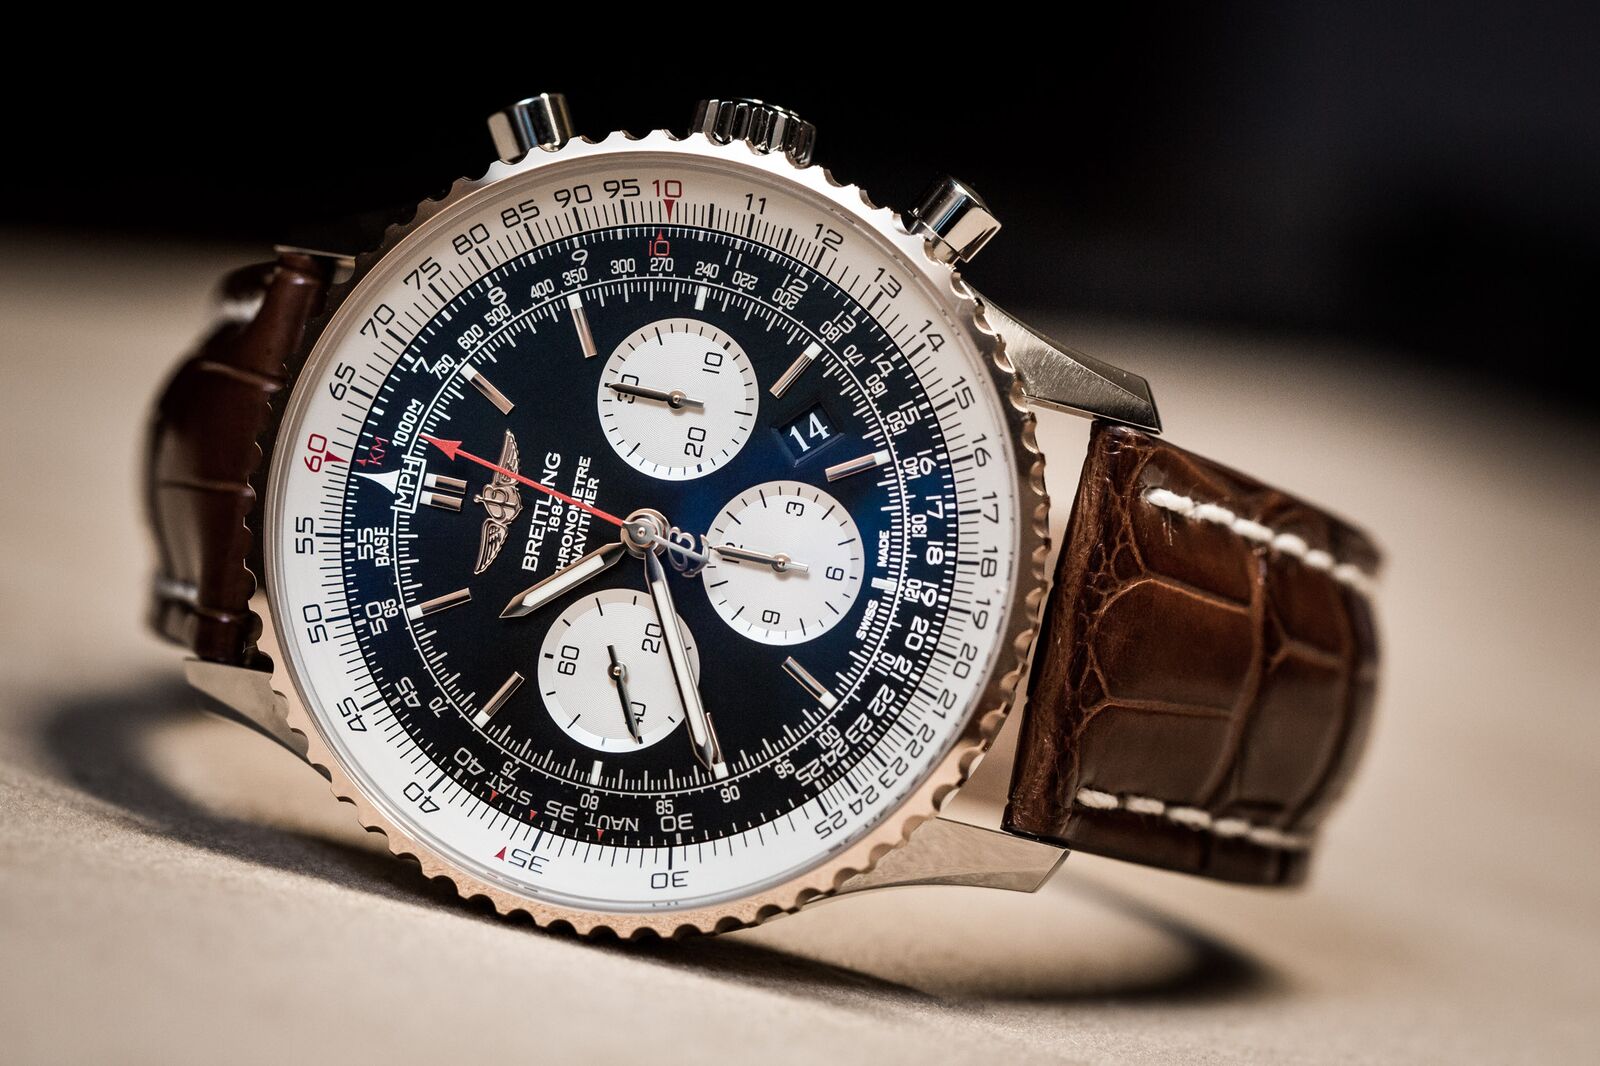 Colors keep the various functions of this Breitling Navitimer 01 apart and easier to read